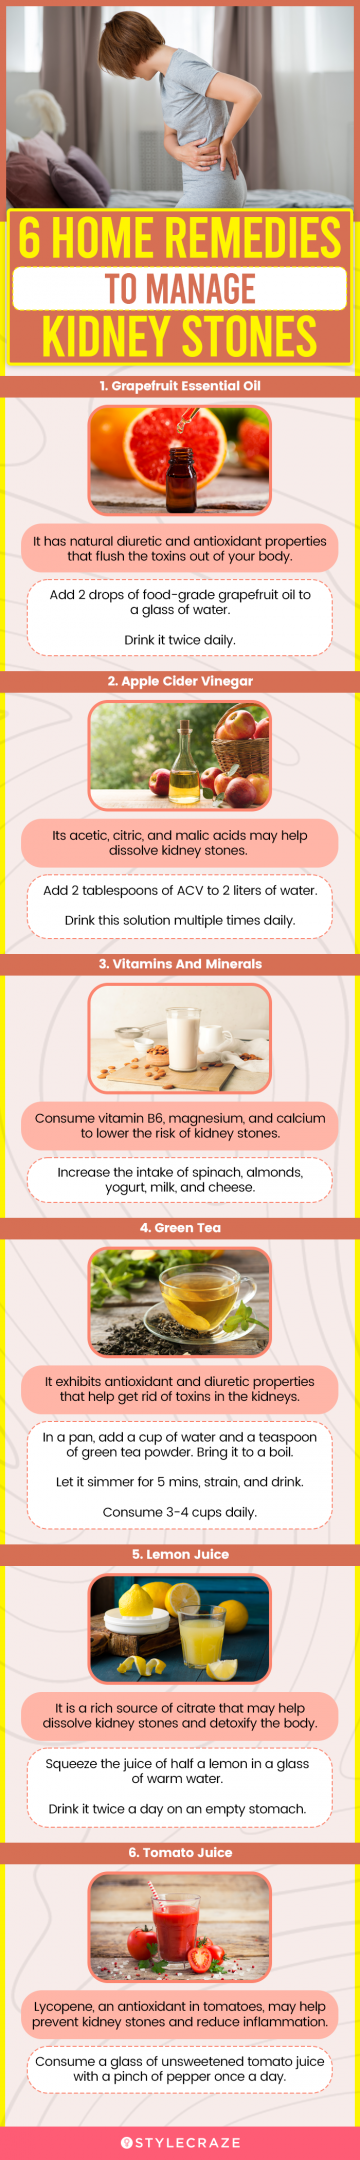 6 home remedies to manage kidney stones (infographic)